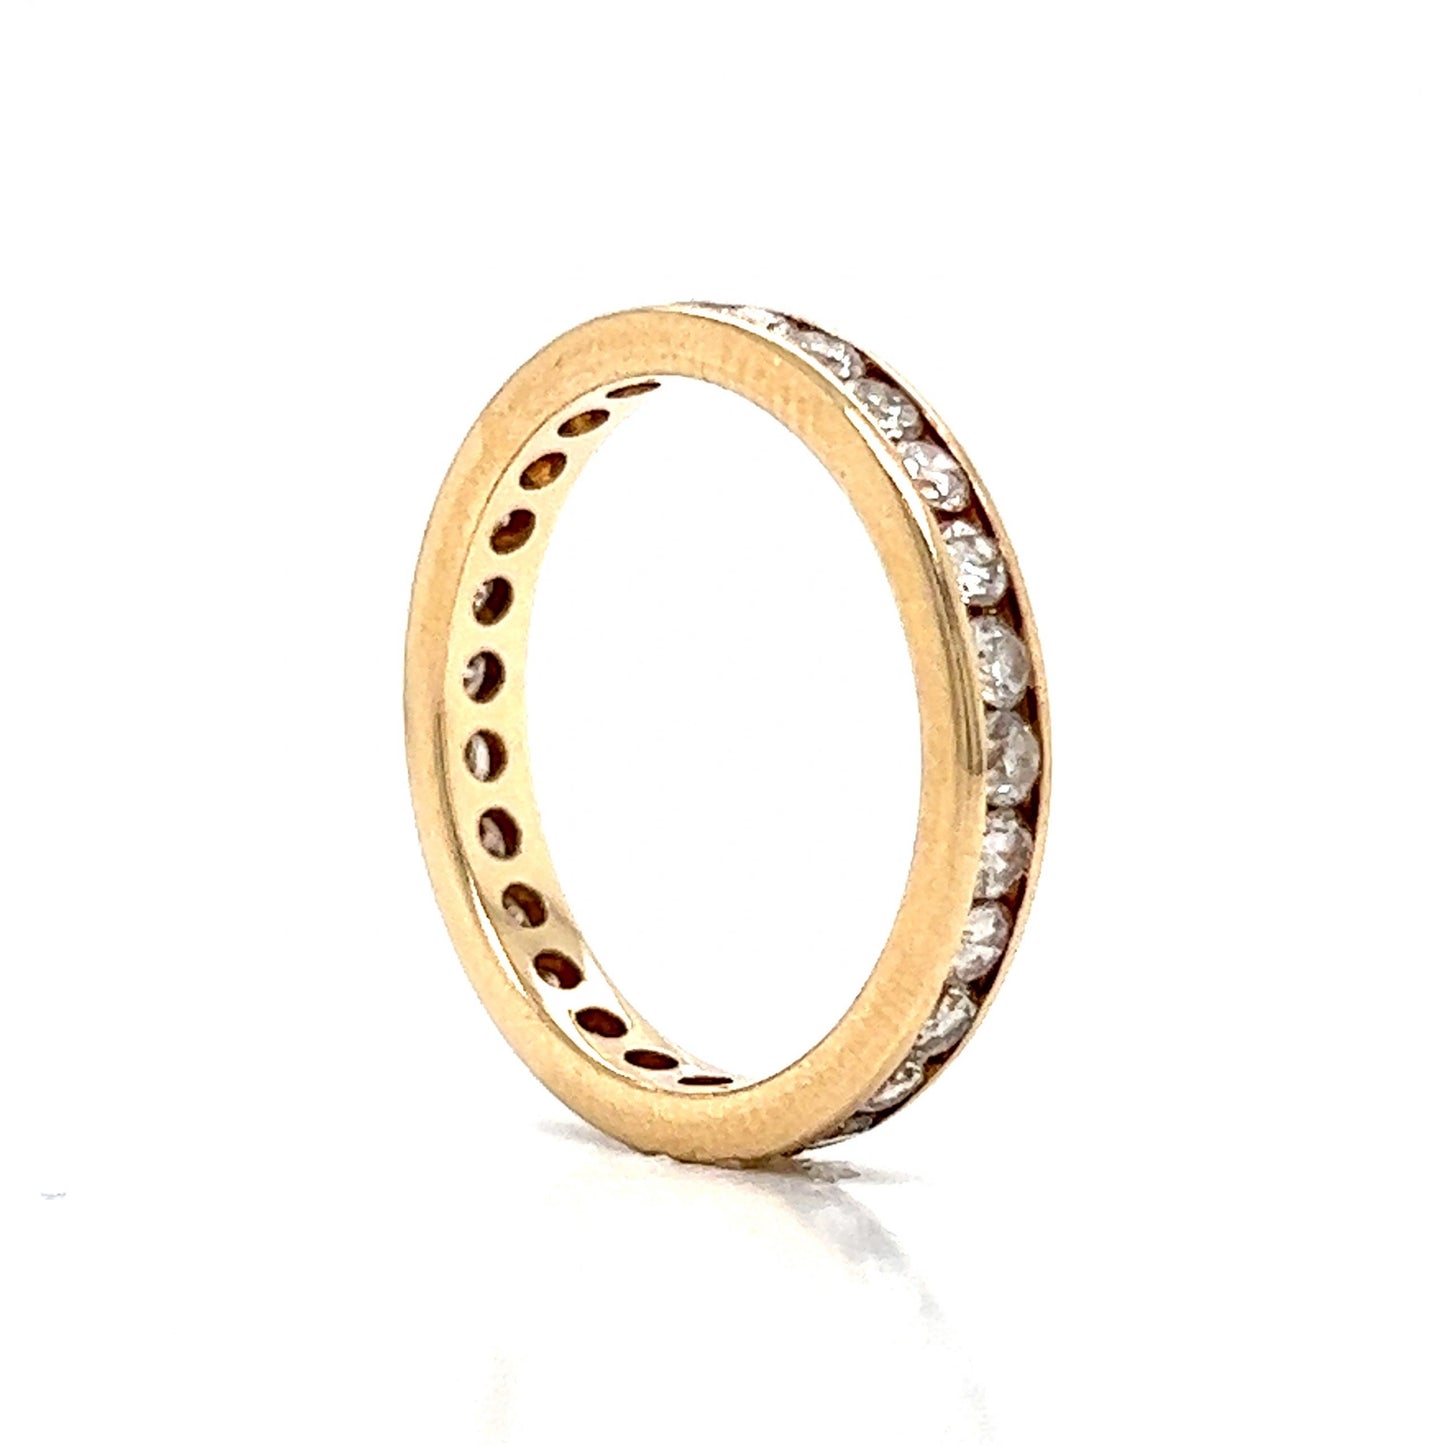 .84 Channel Set Diamond Eternity Band in 14k Yellow Gold